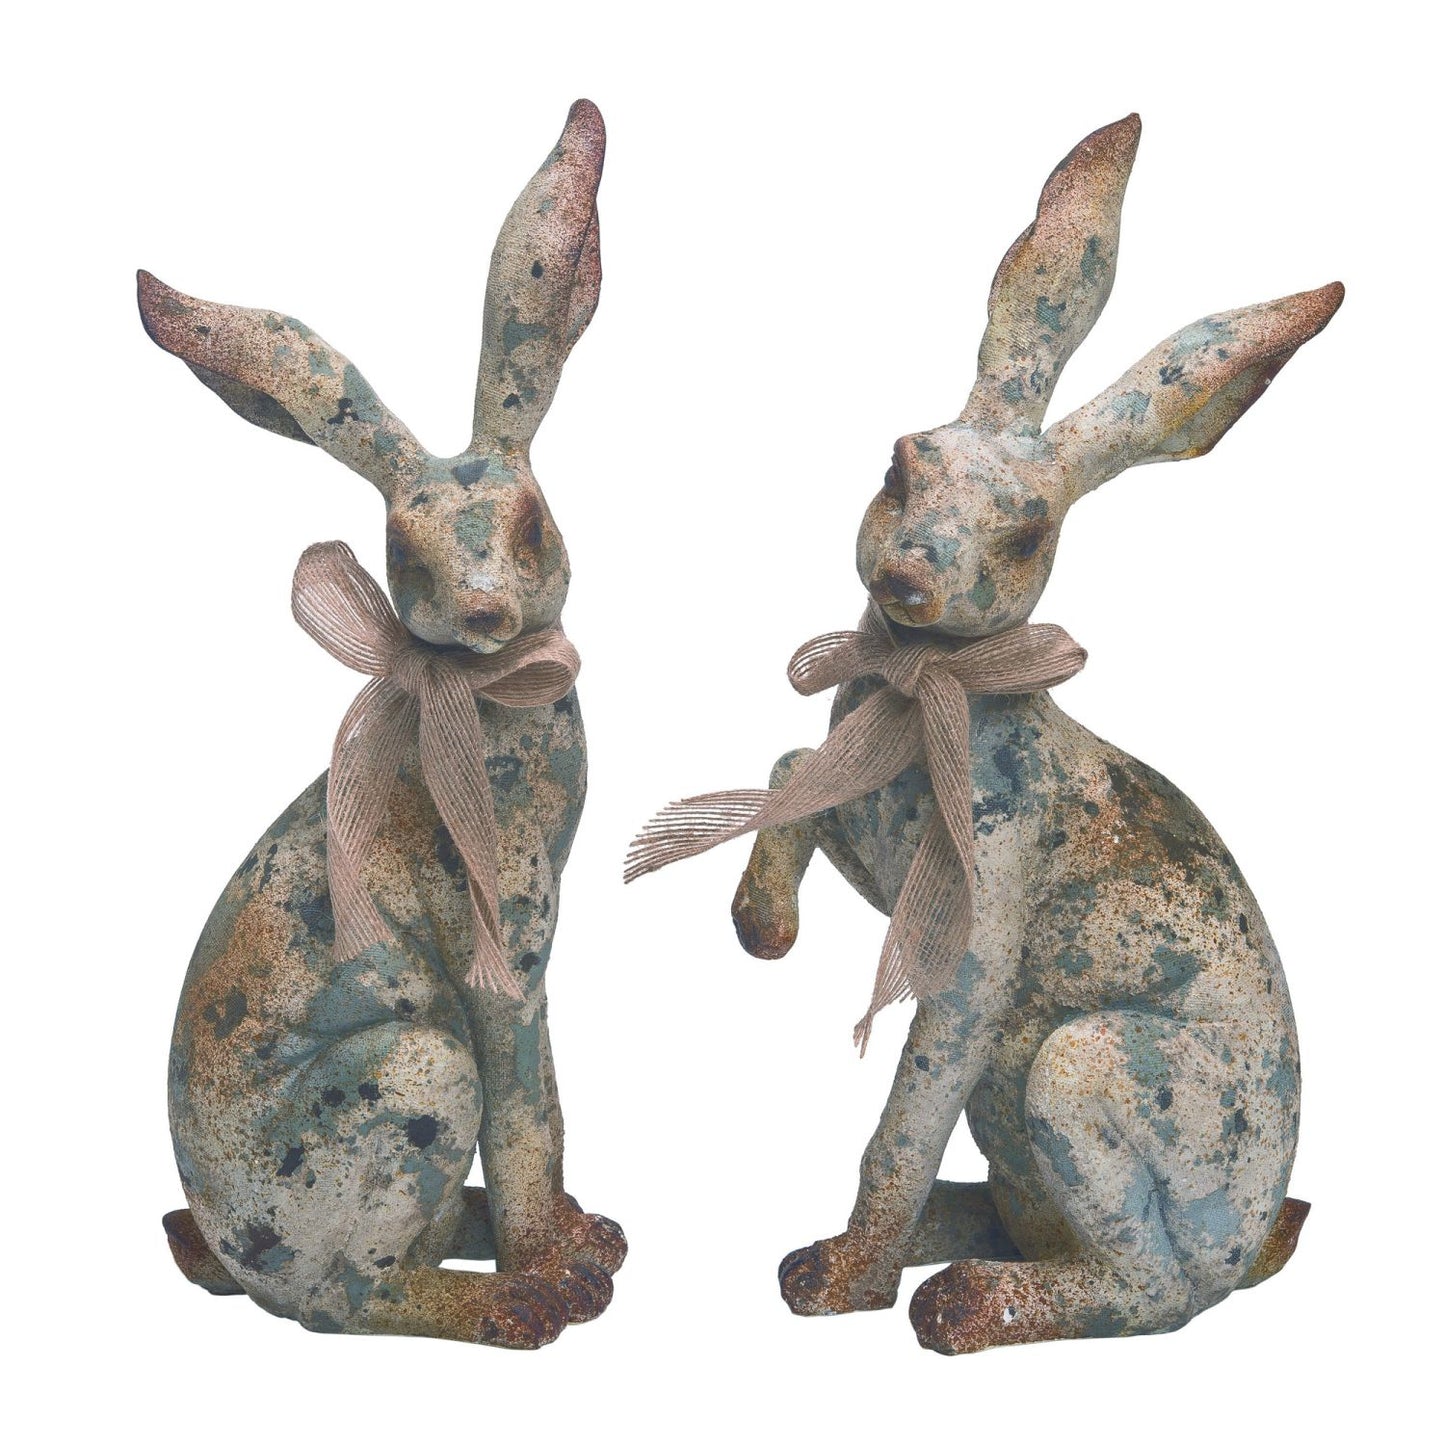 Transpac Resin Rustic Bunny With Bow, Set Of 2, Assortment